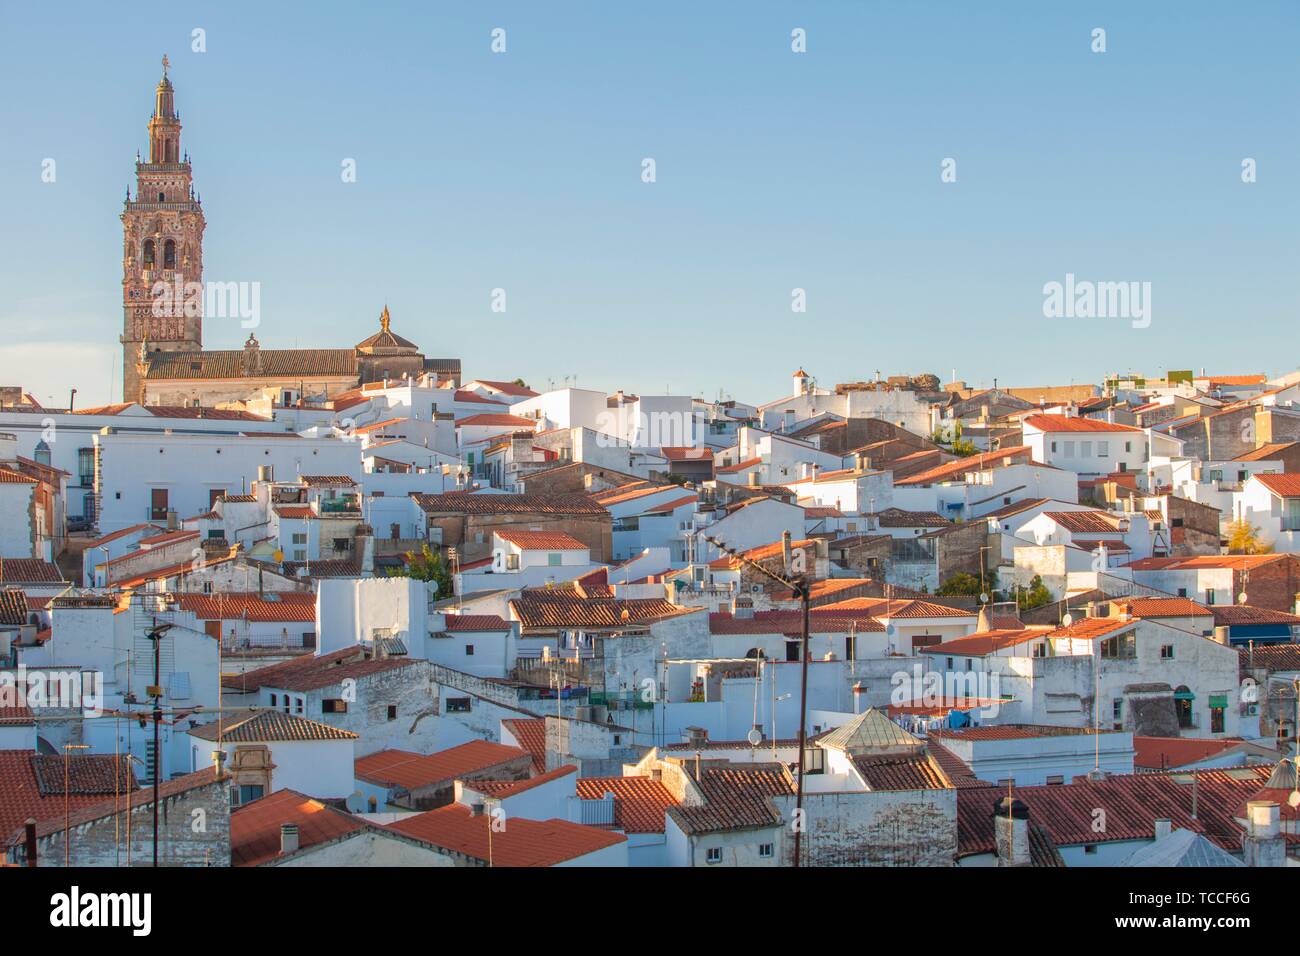 Jerez de los Caballeros townscape from Templar Fortress viewpoint. Church of San Bartolome tower at bottom. Stock Photo